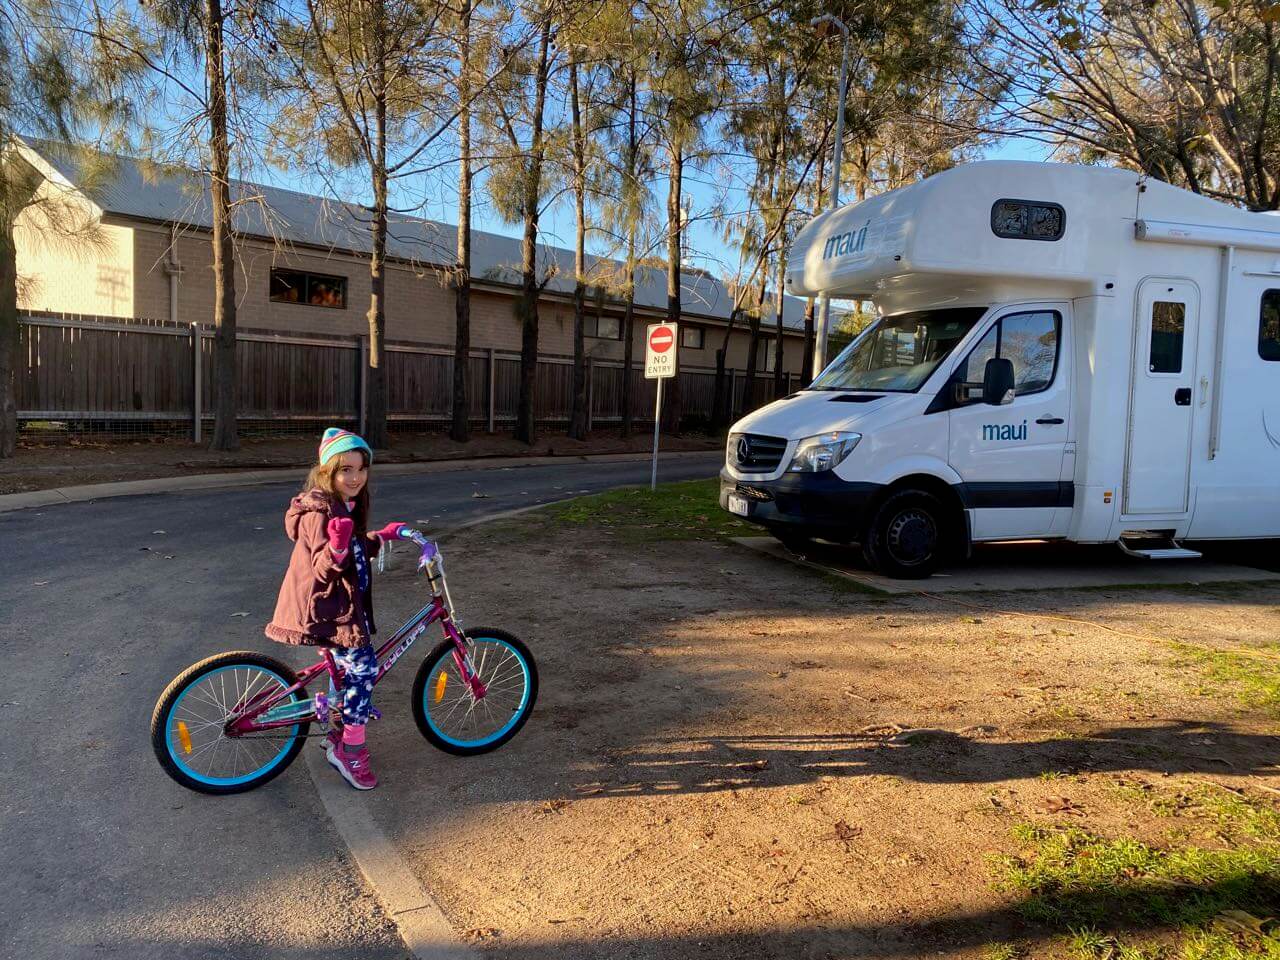 Maui campervan with young girl on a bike